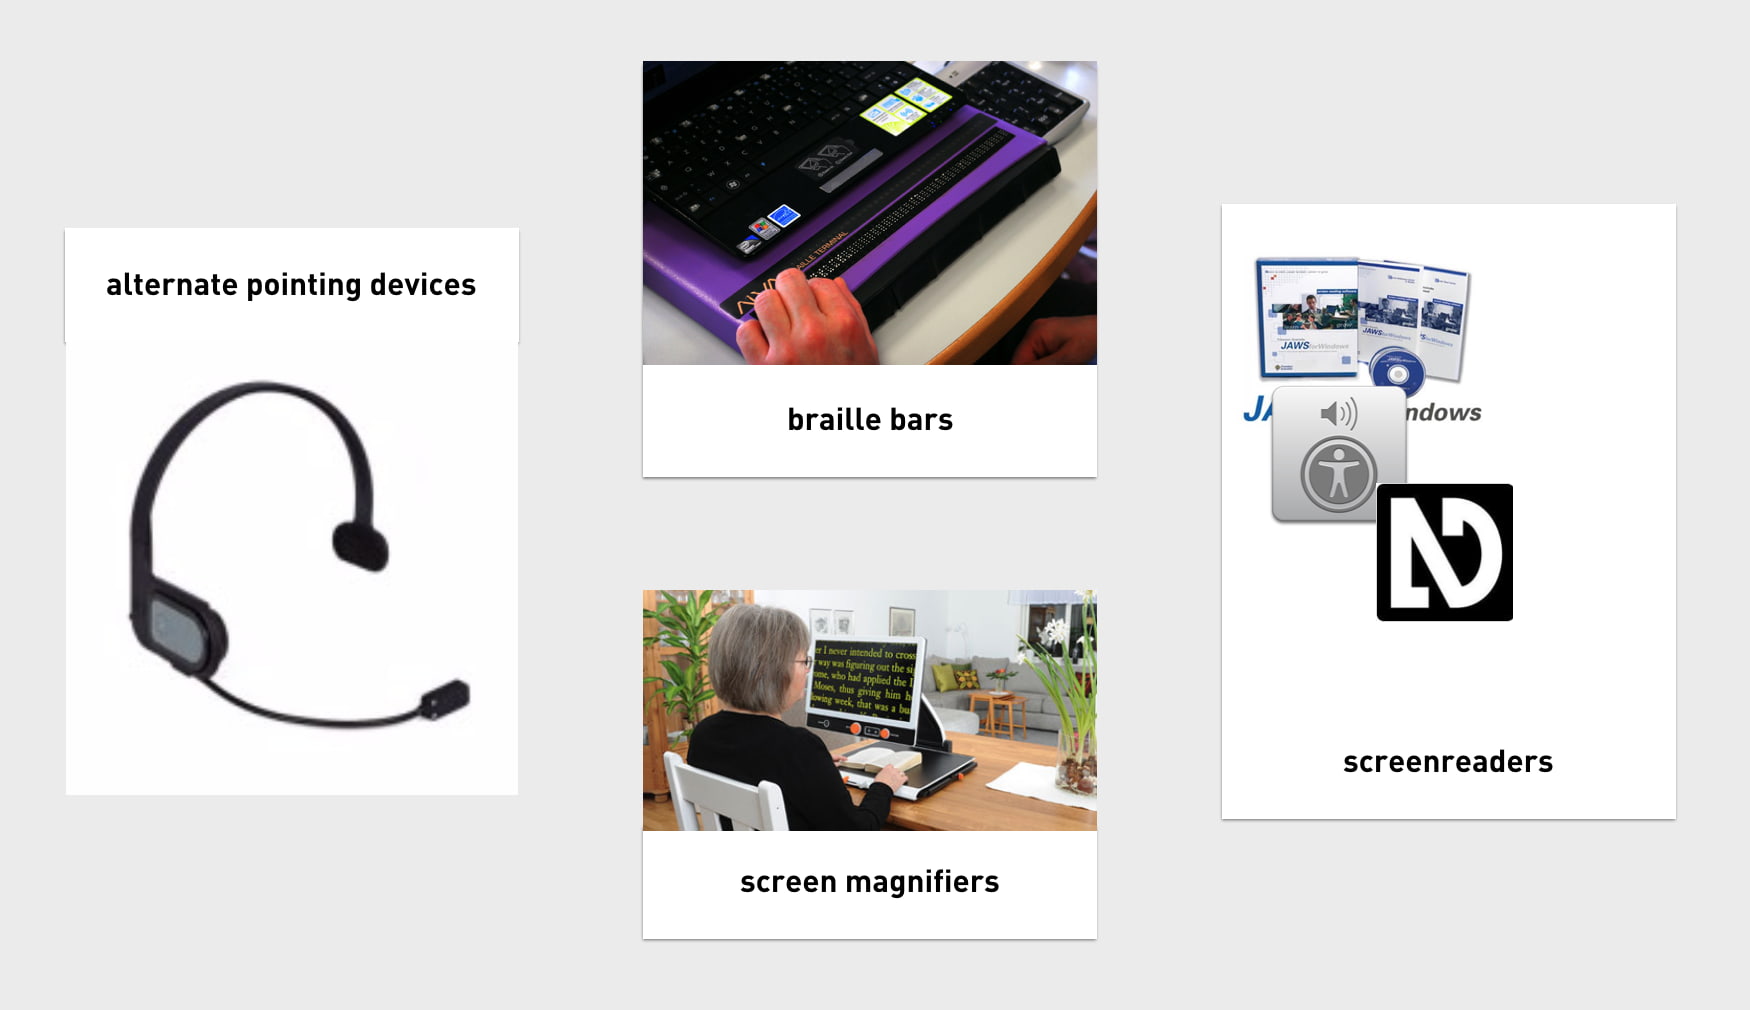 Alternate pointing devices, braille bars, screen magnifiers and screenreaders